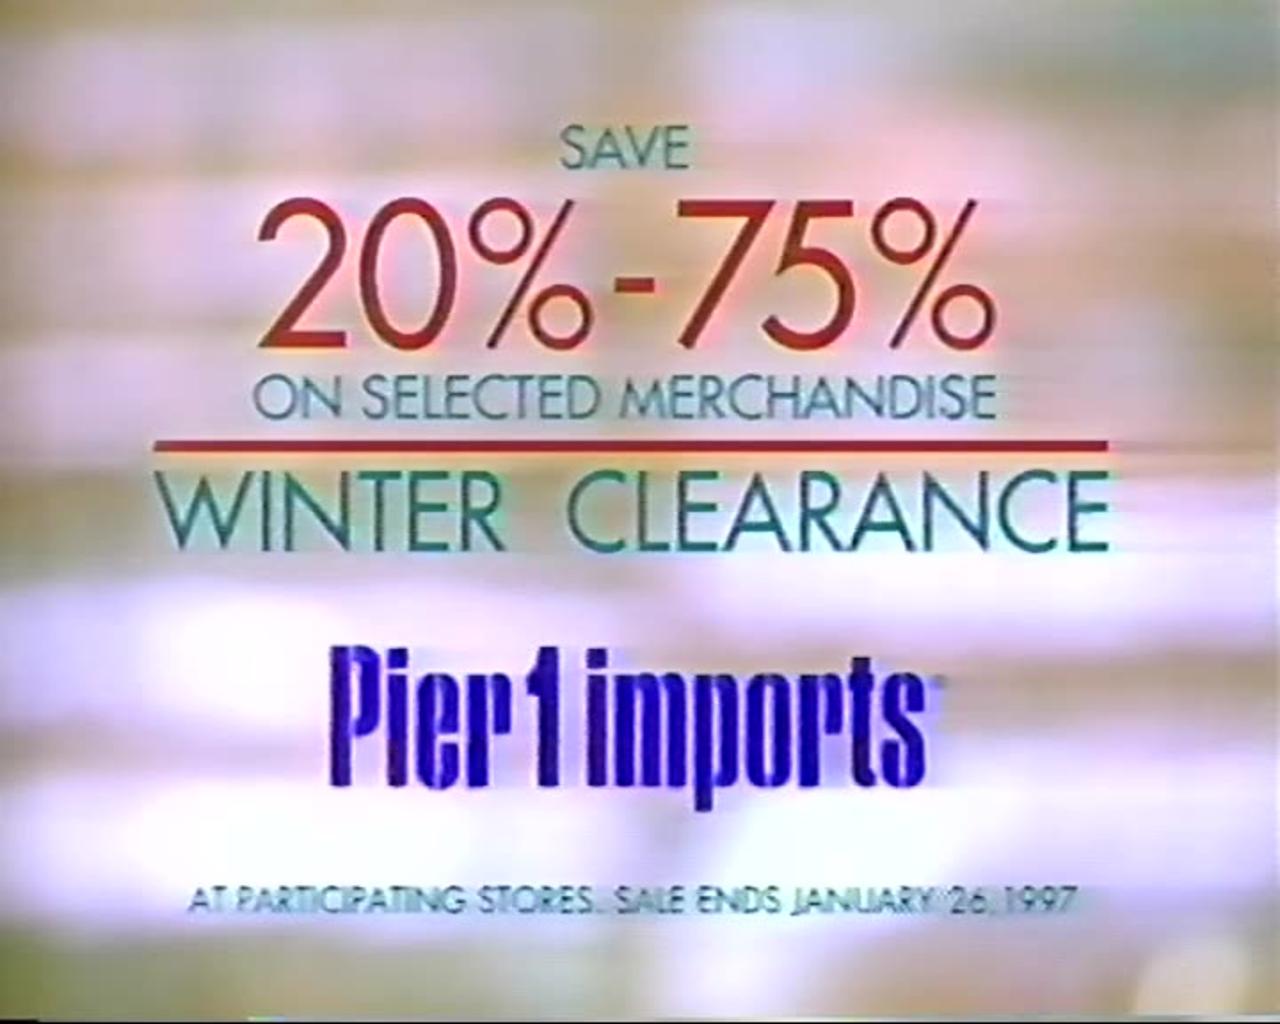 January 3, 1997 - Clearance Sale at Pier 1 Imports